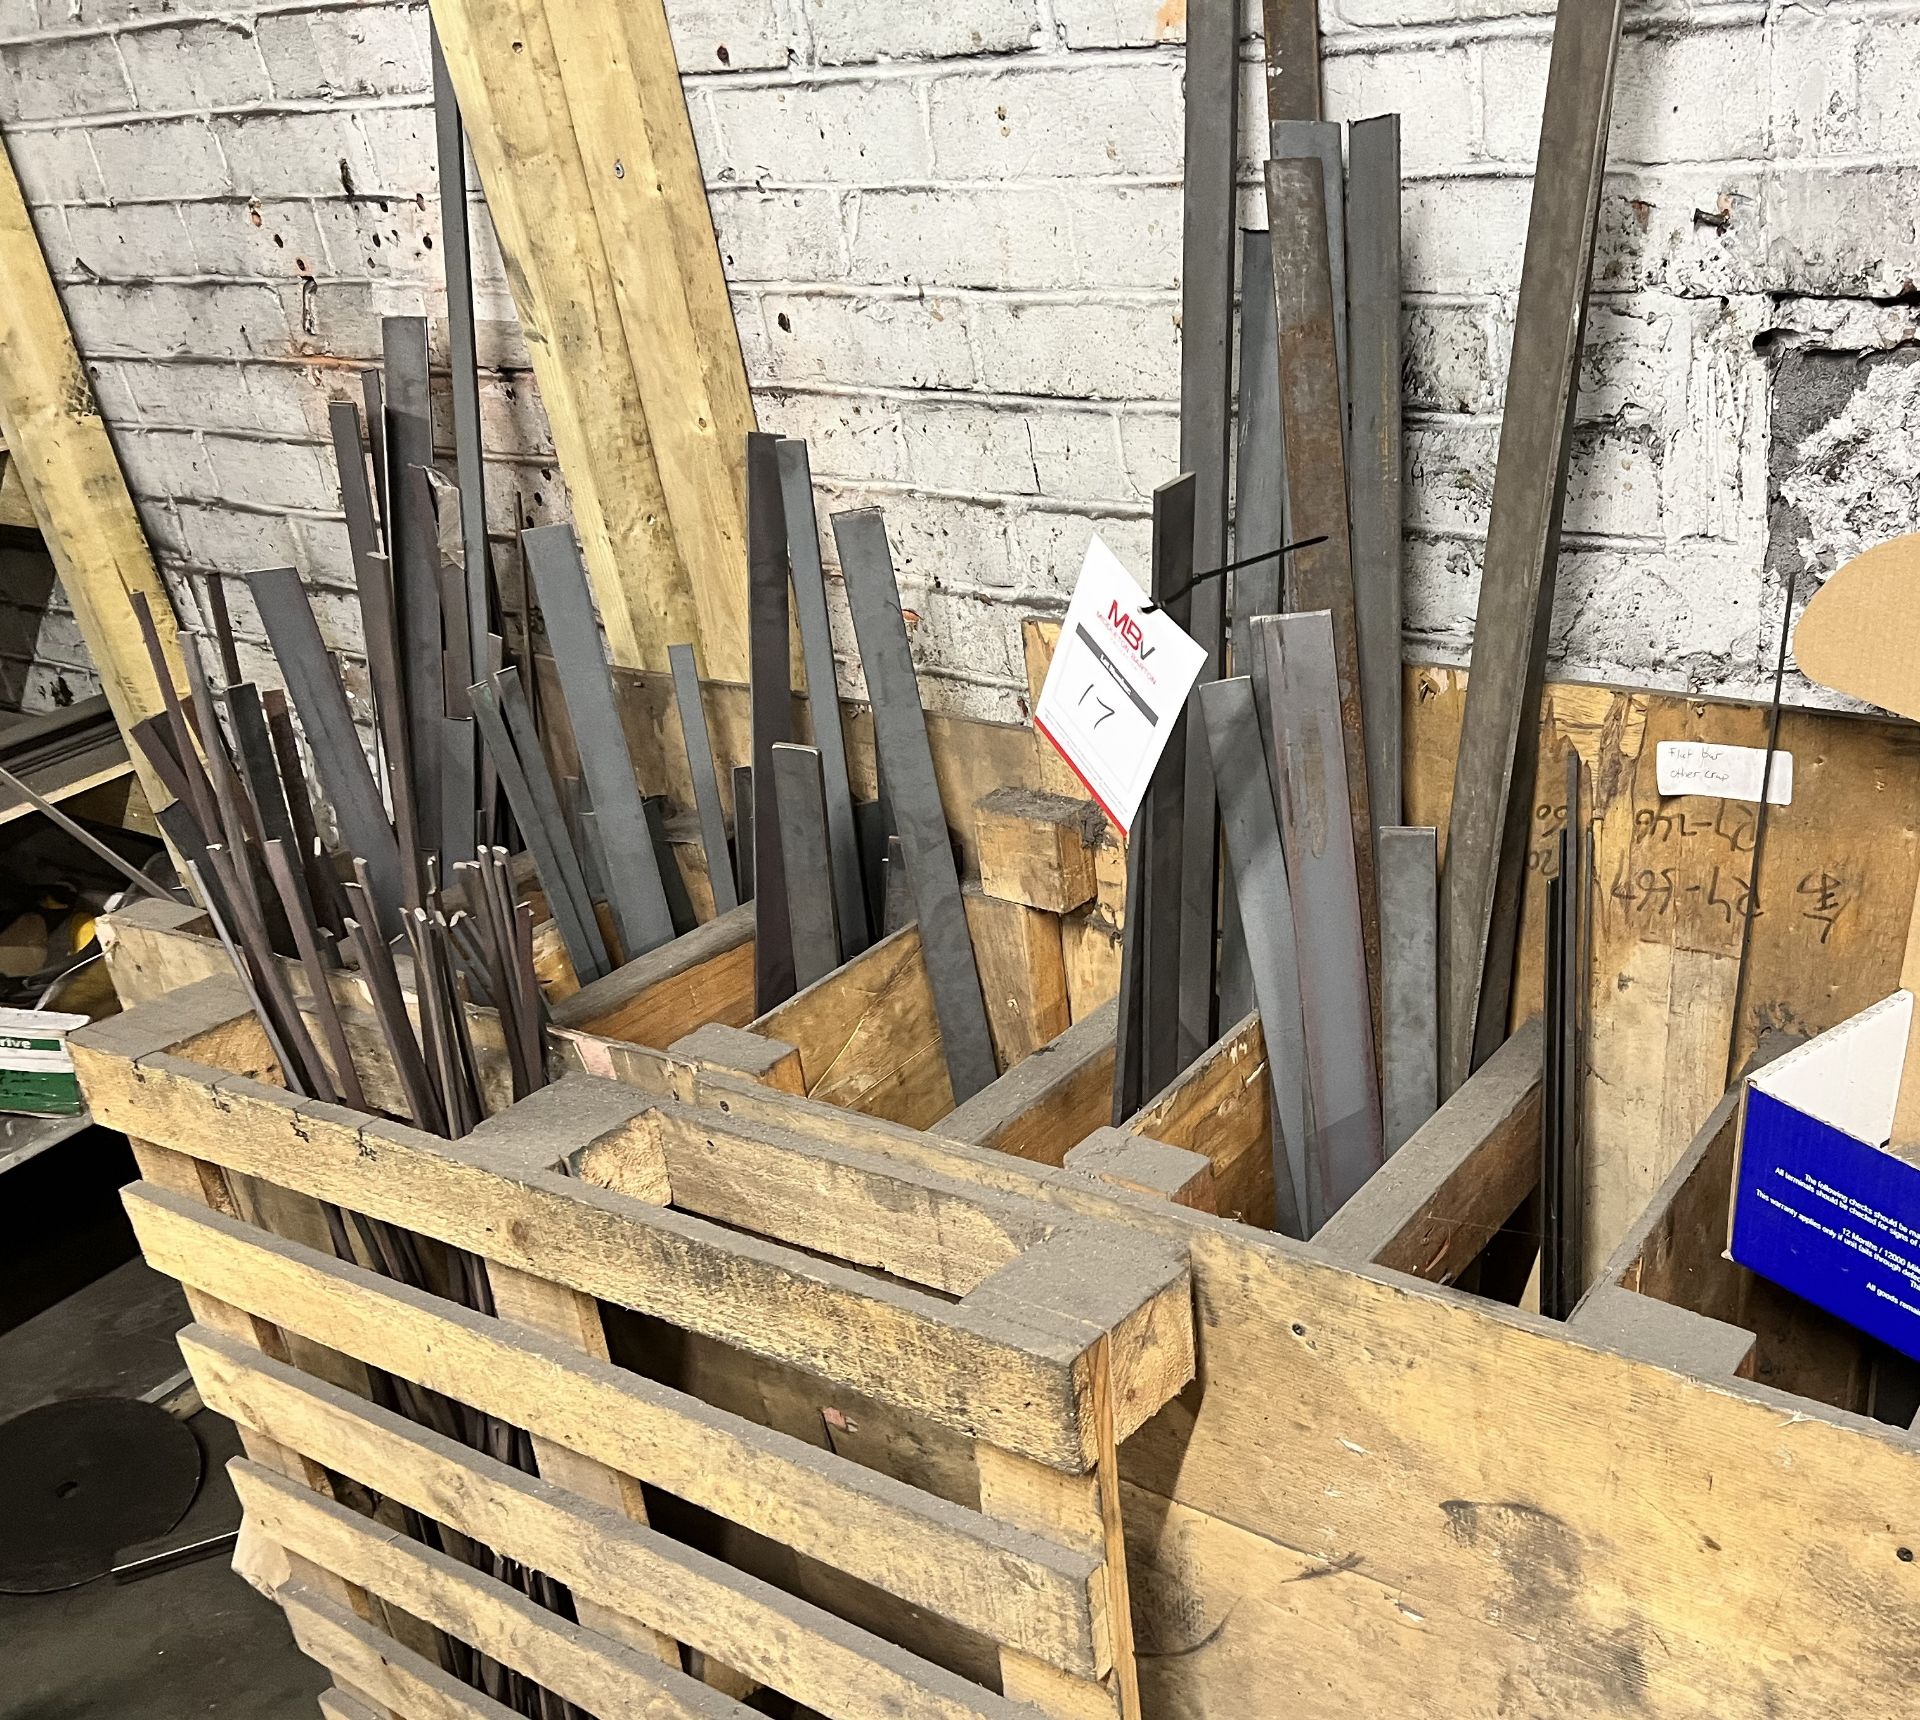 Contents of Timber Box including Flat Steel Bar